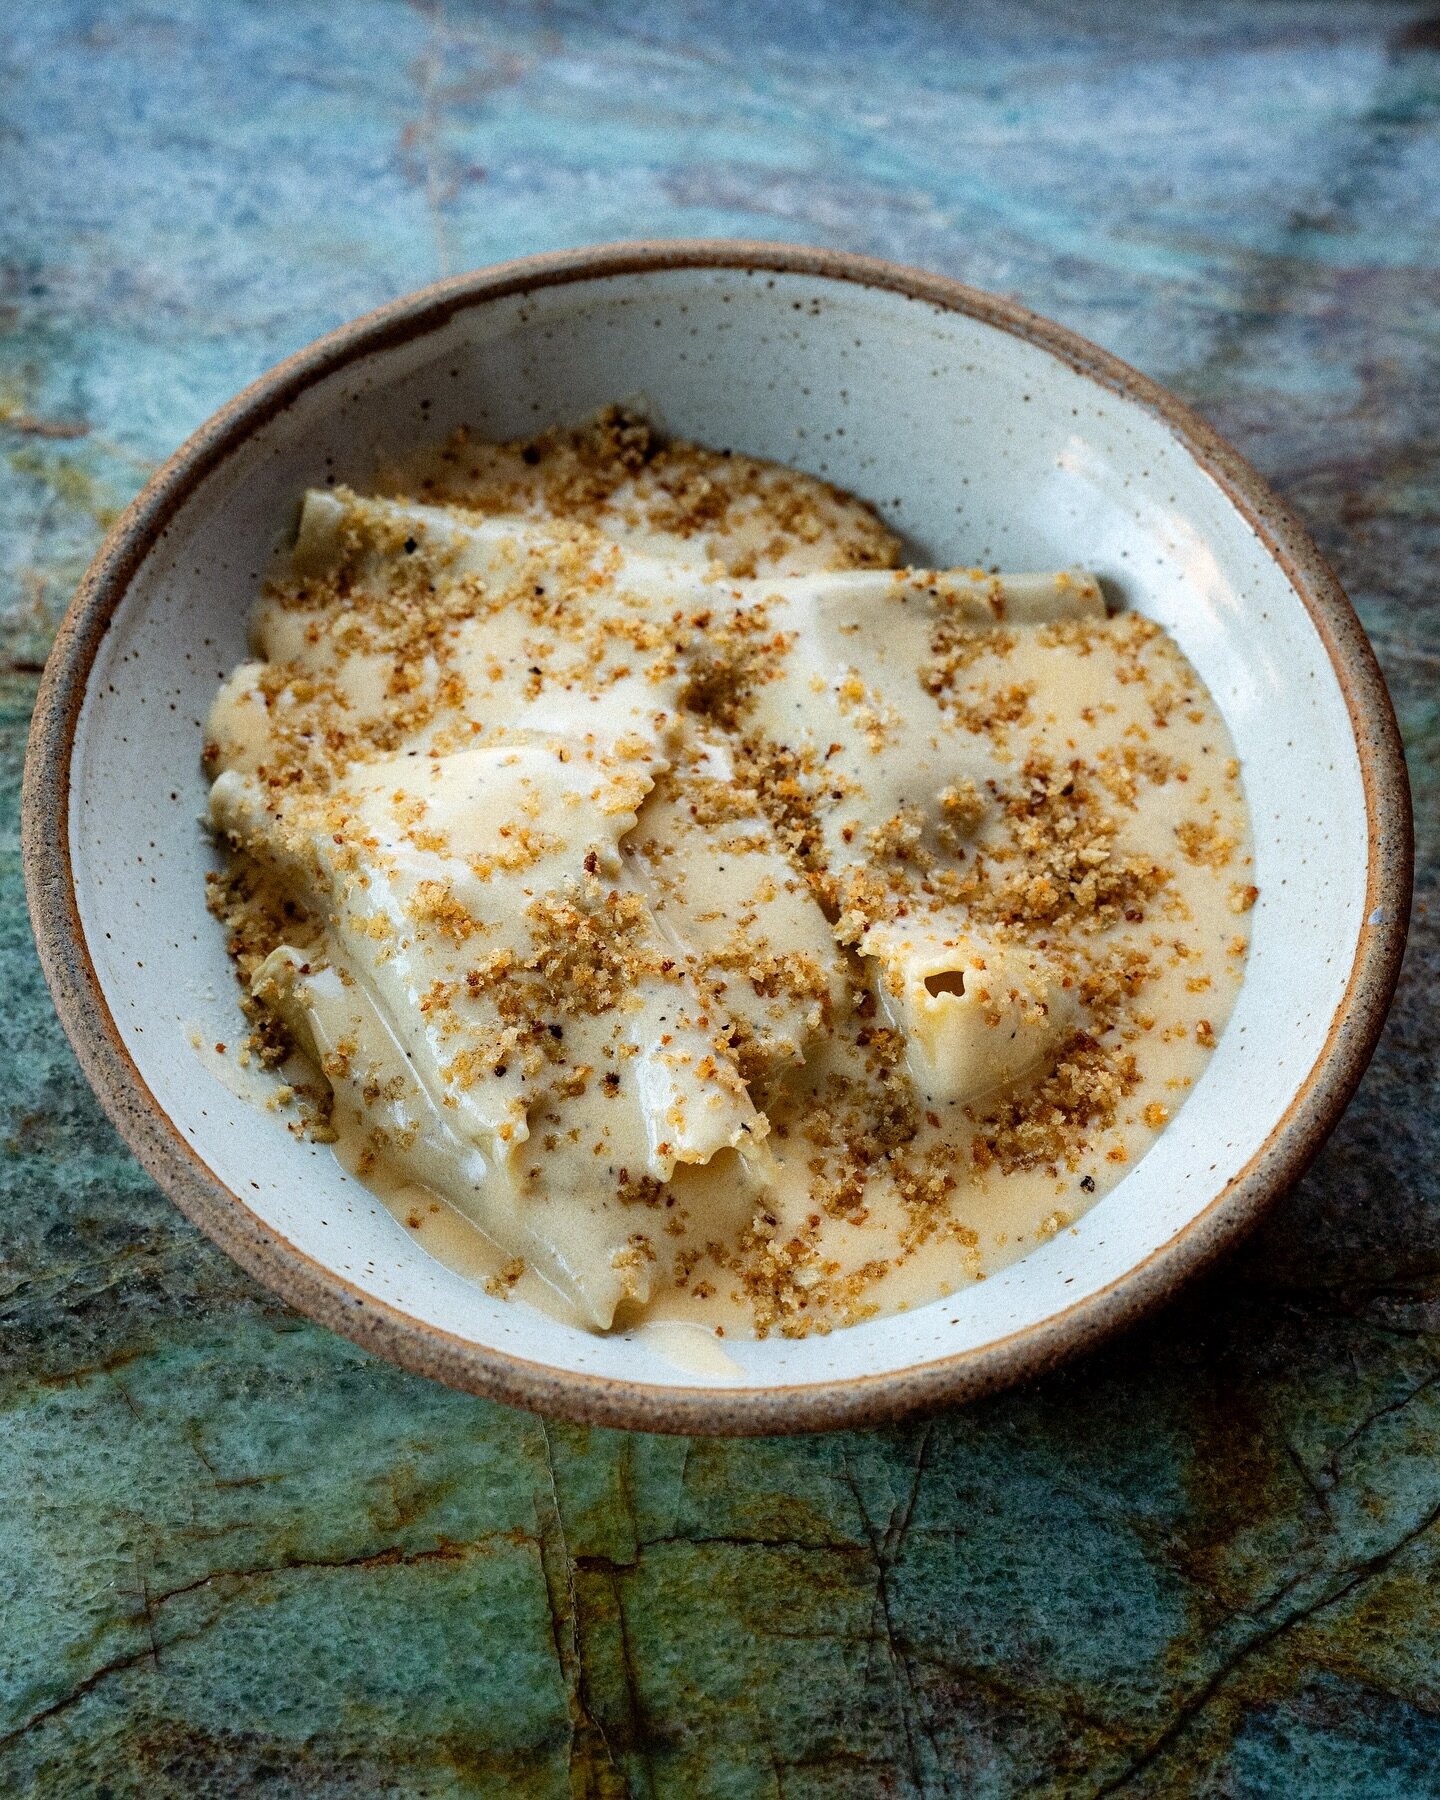 Rainy days call for big bowls of Mac and cheese&hellip;

Homemade sheet pasta with our silky cheese sauce and lemon brown butter panko.

📷 @spencerpazer